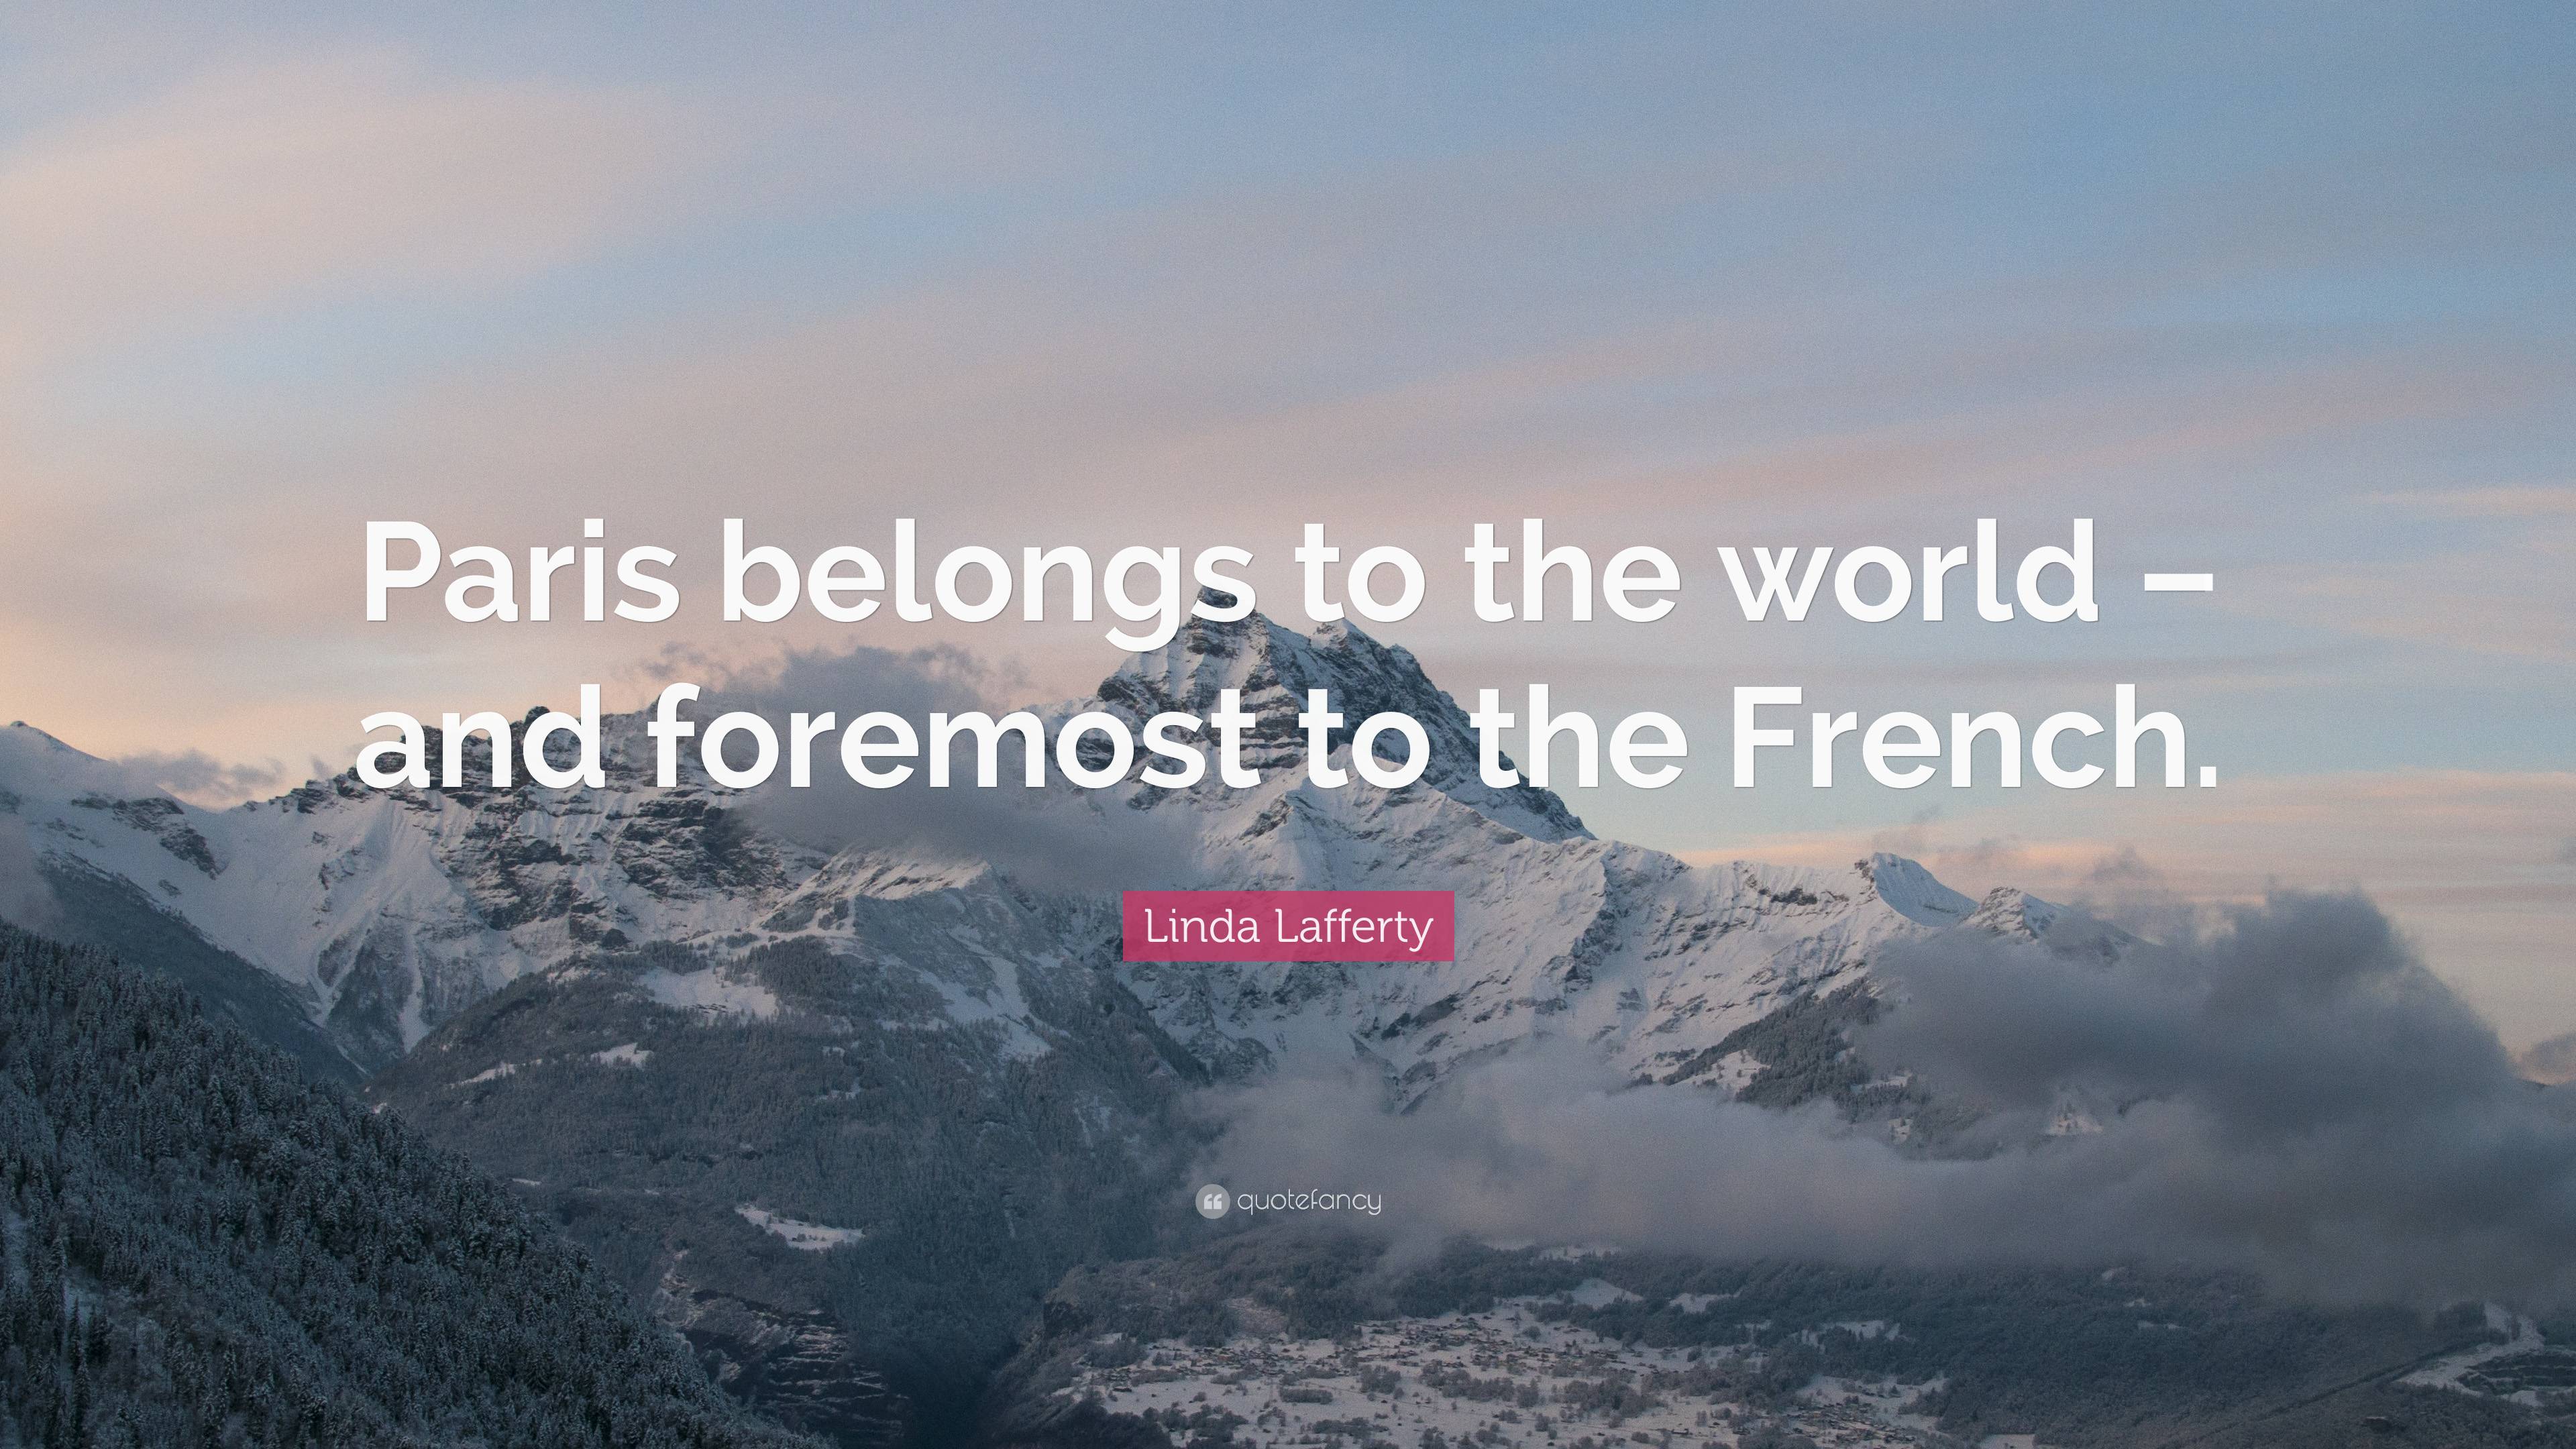 Linda Lafferty Quote: “Paris belongs to the world – and foremost to the ...